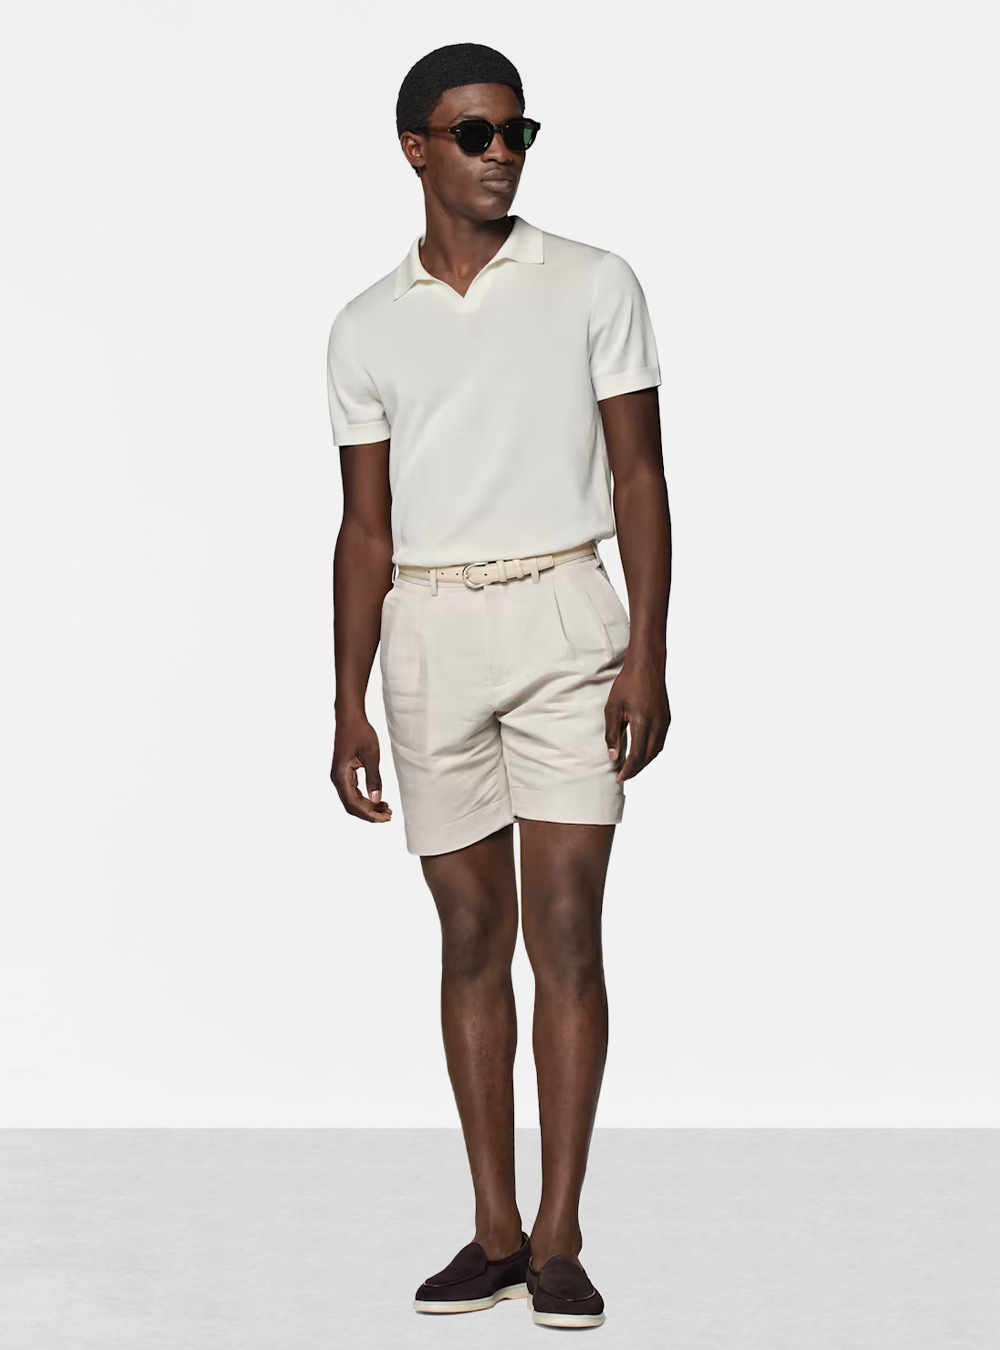 off-white polo shirt, beige shorts, and brown loafers